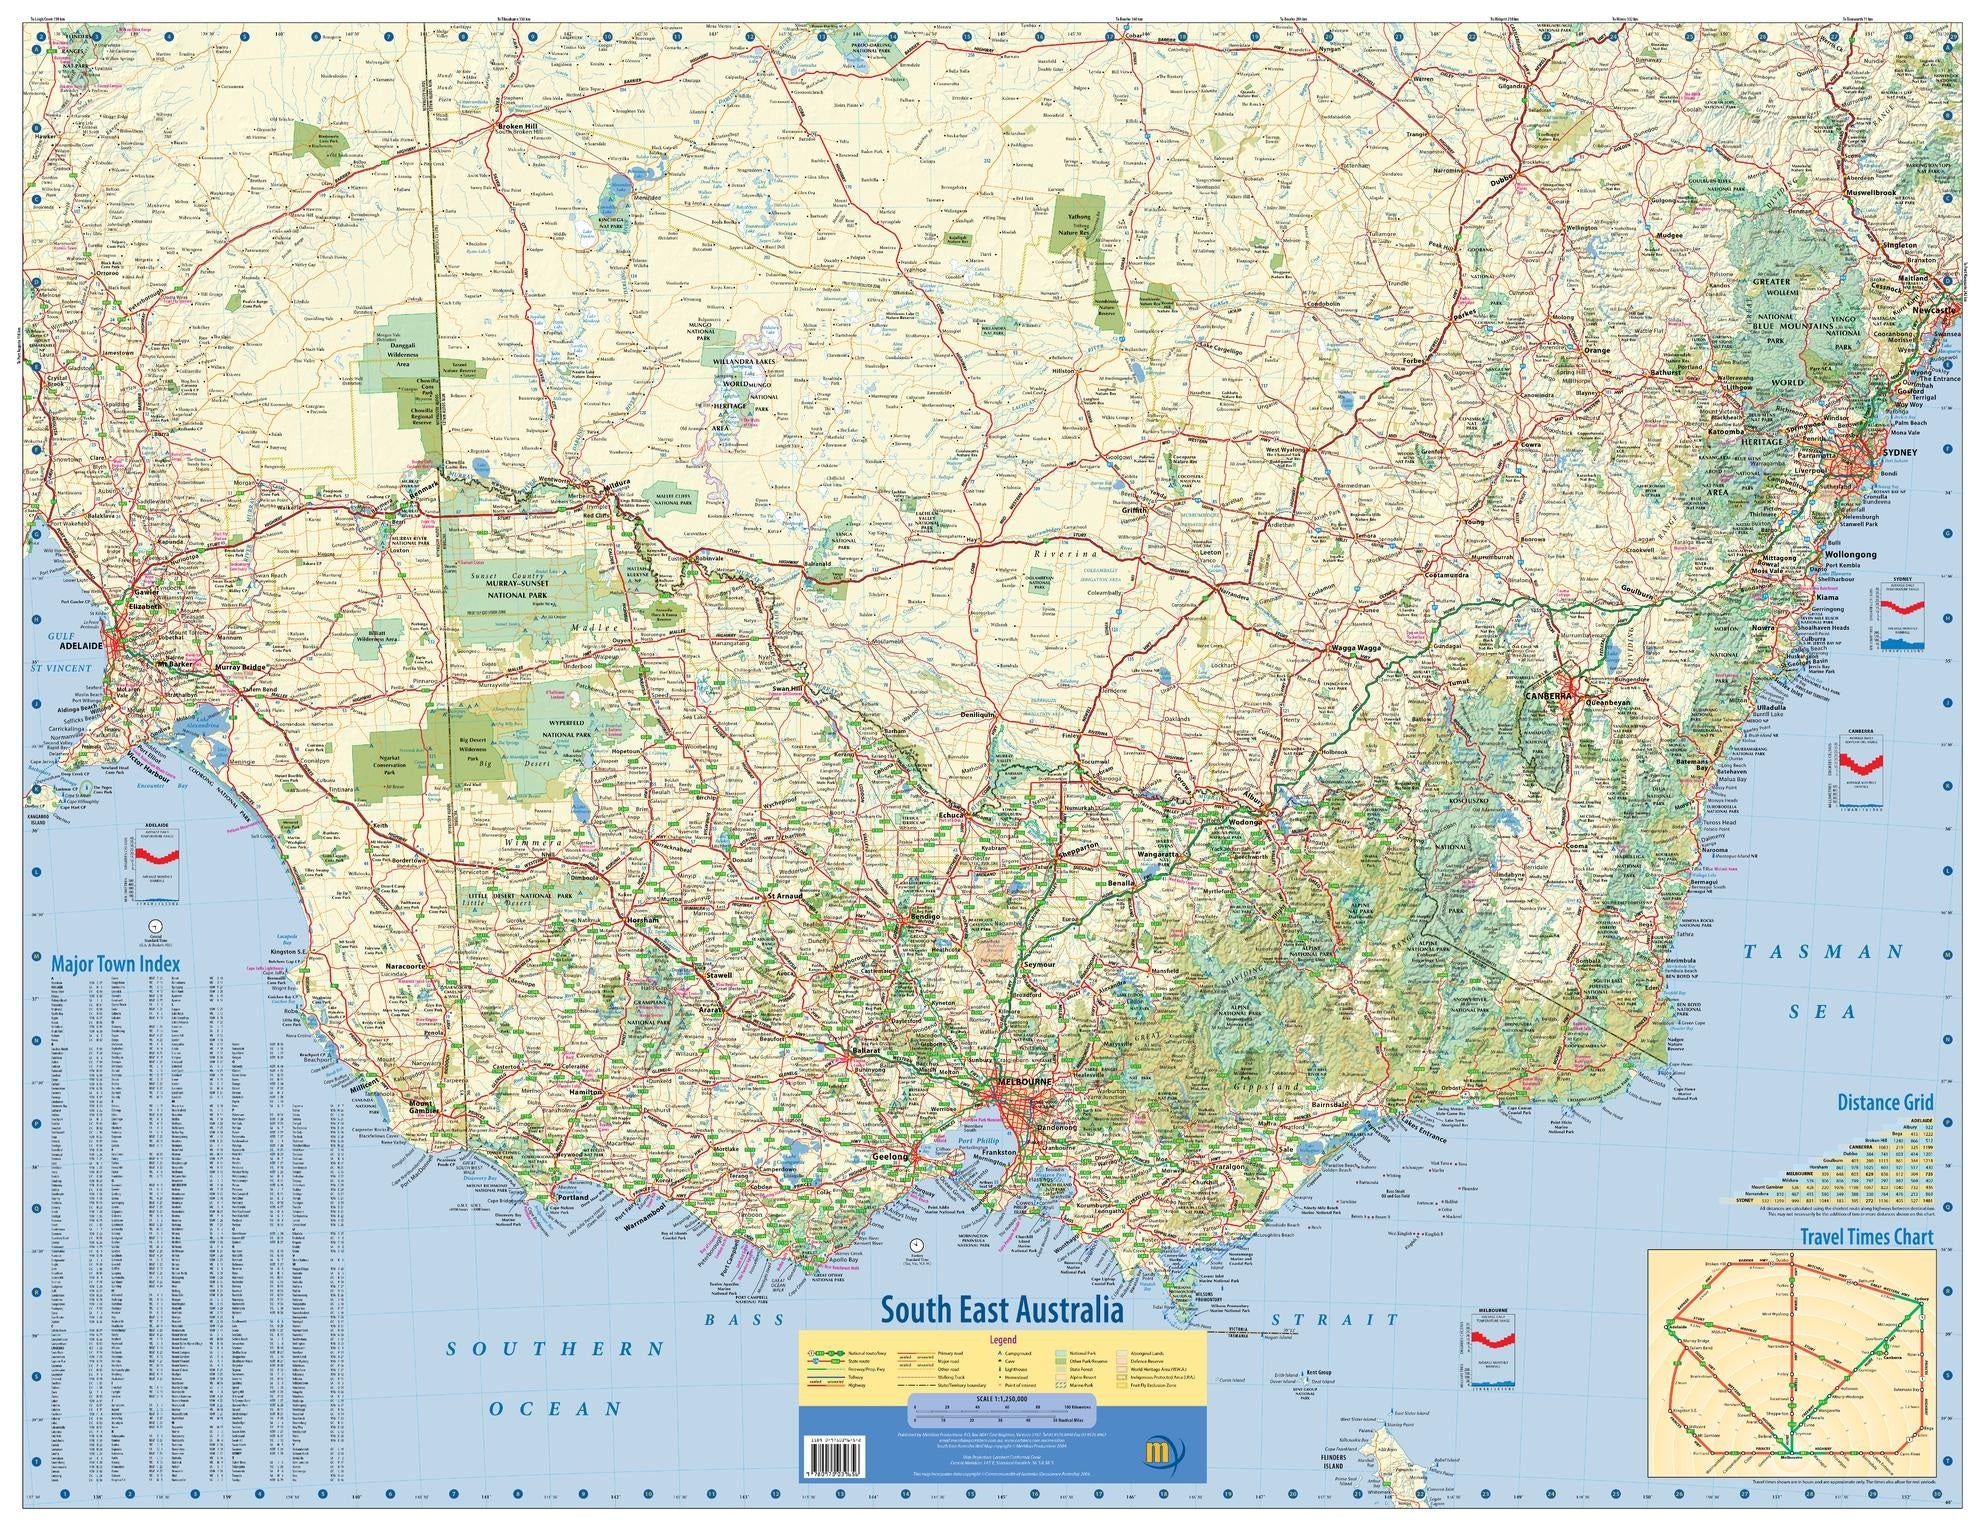 South East Australia Wall Map (flat) by Meridian Maps (2004)